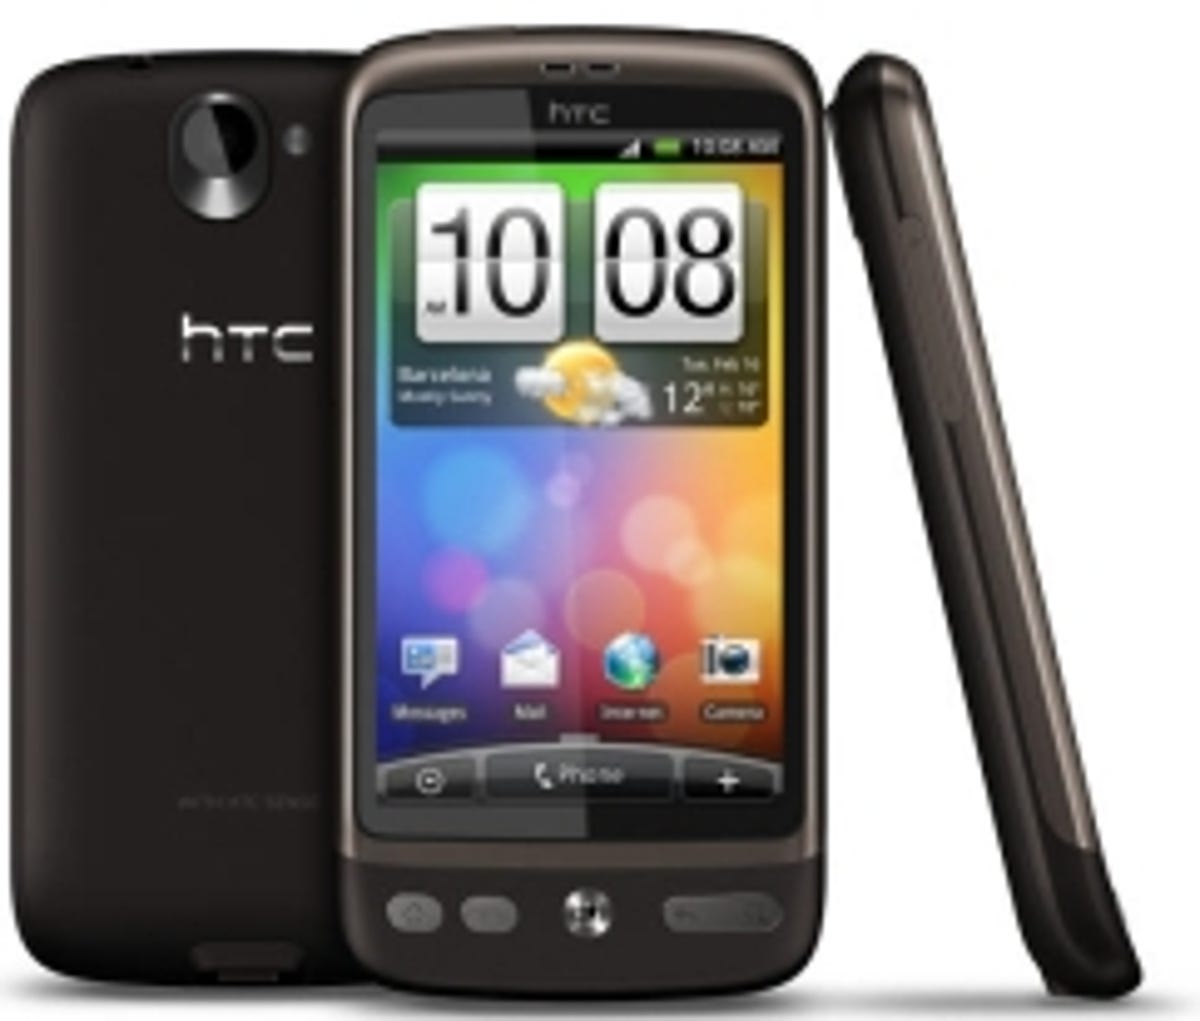 The Desire is one of four phones to be sold in China under the HTC name.